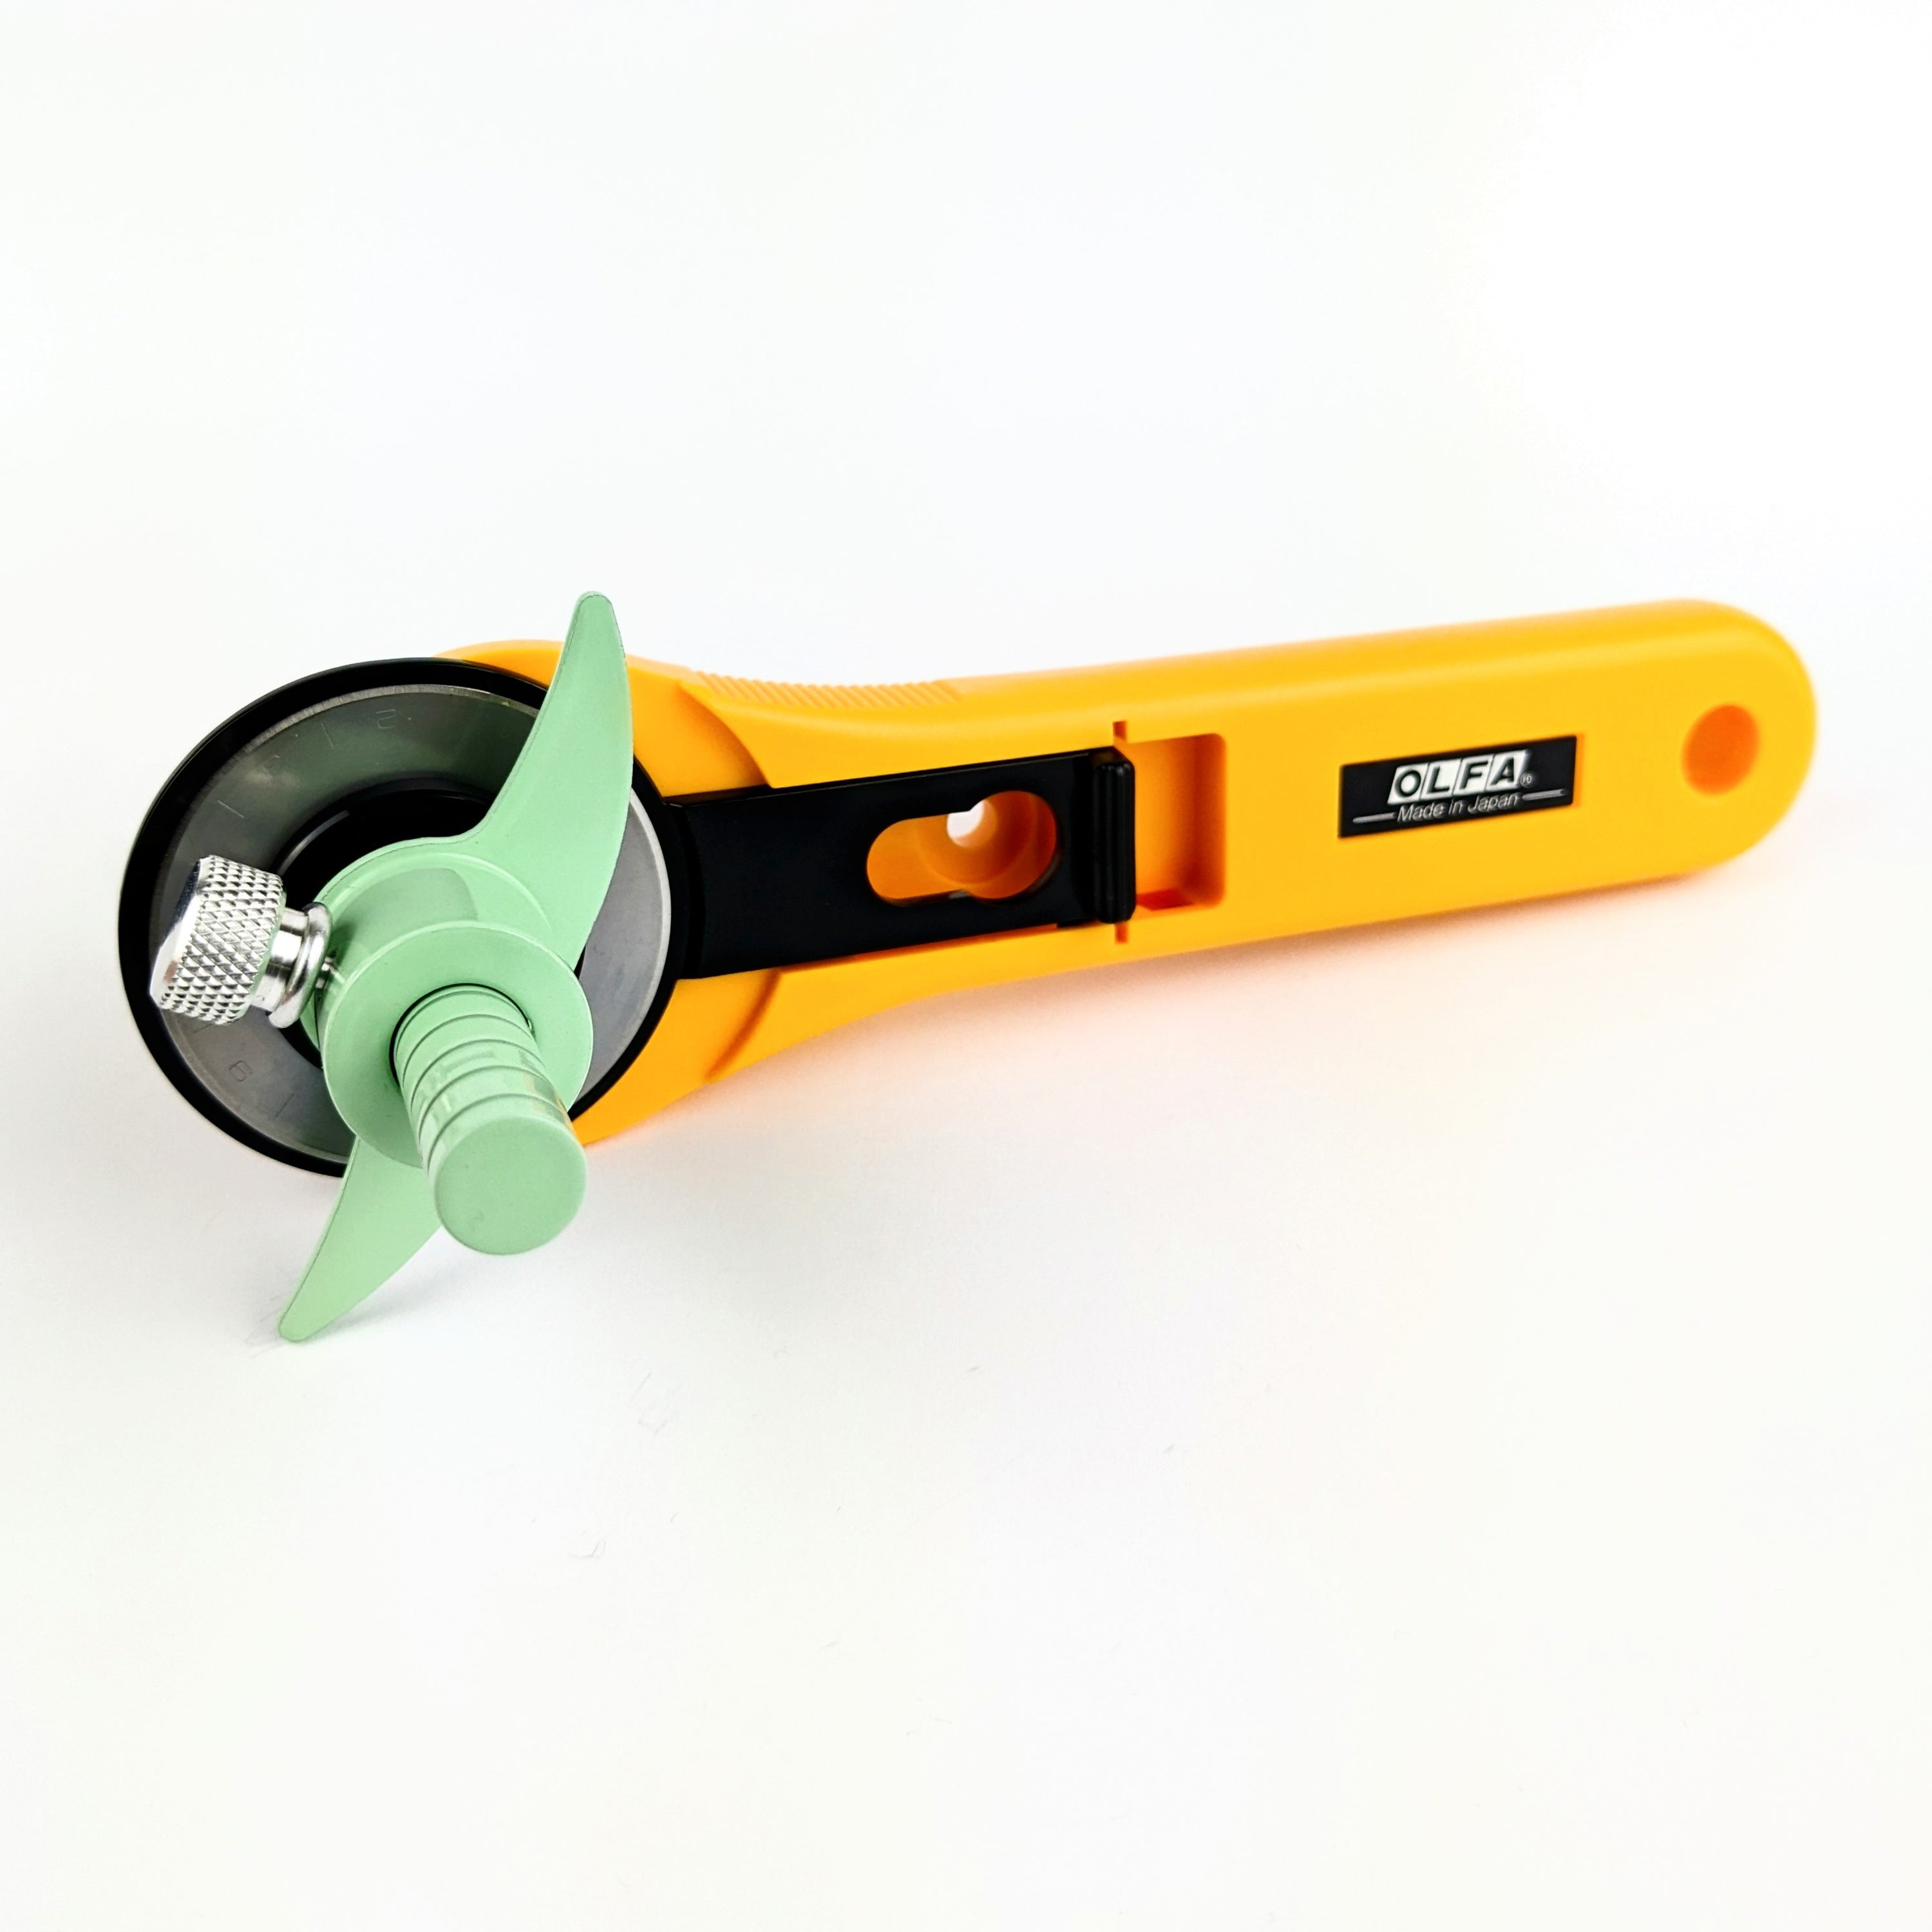 Rotary cutter set (color edition)